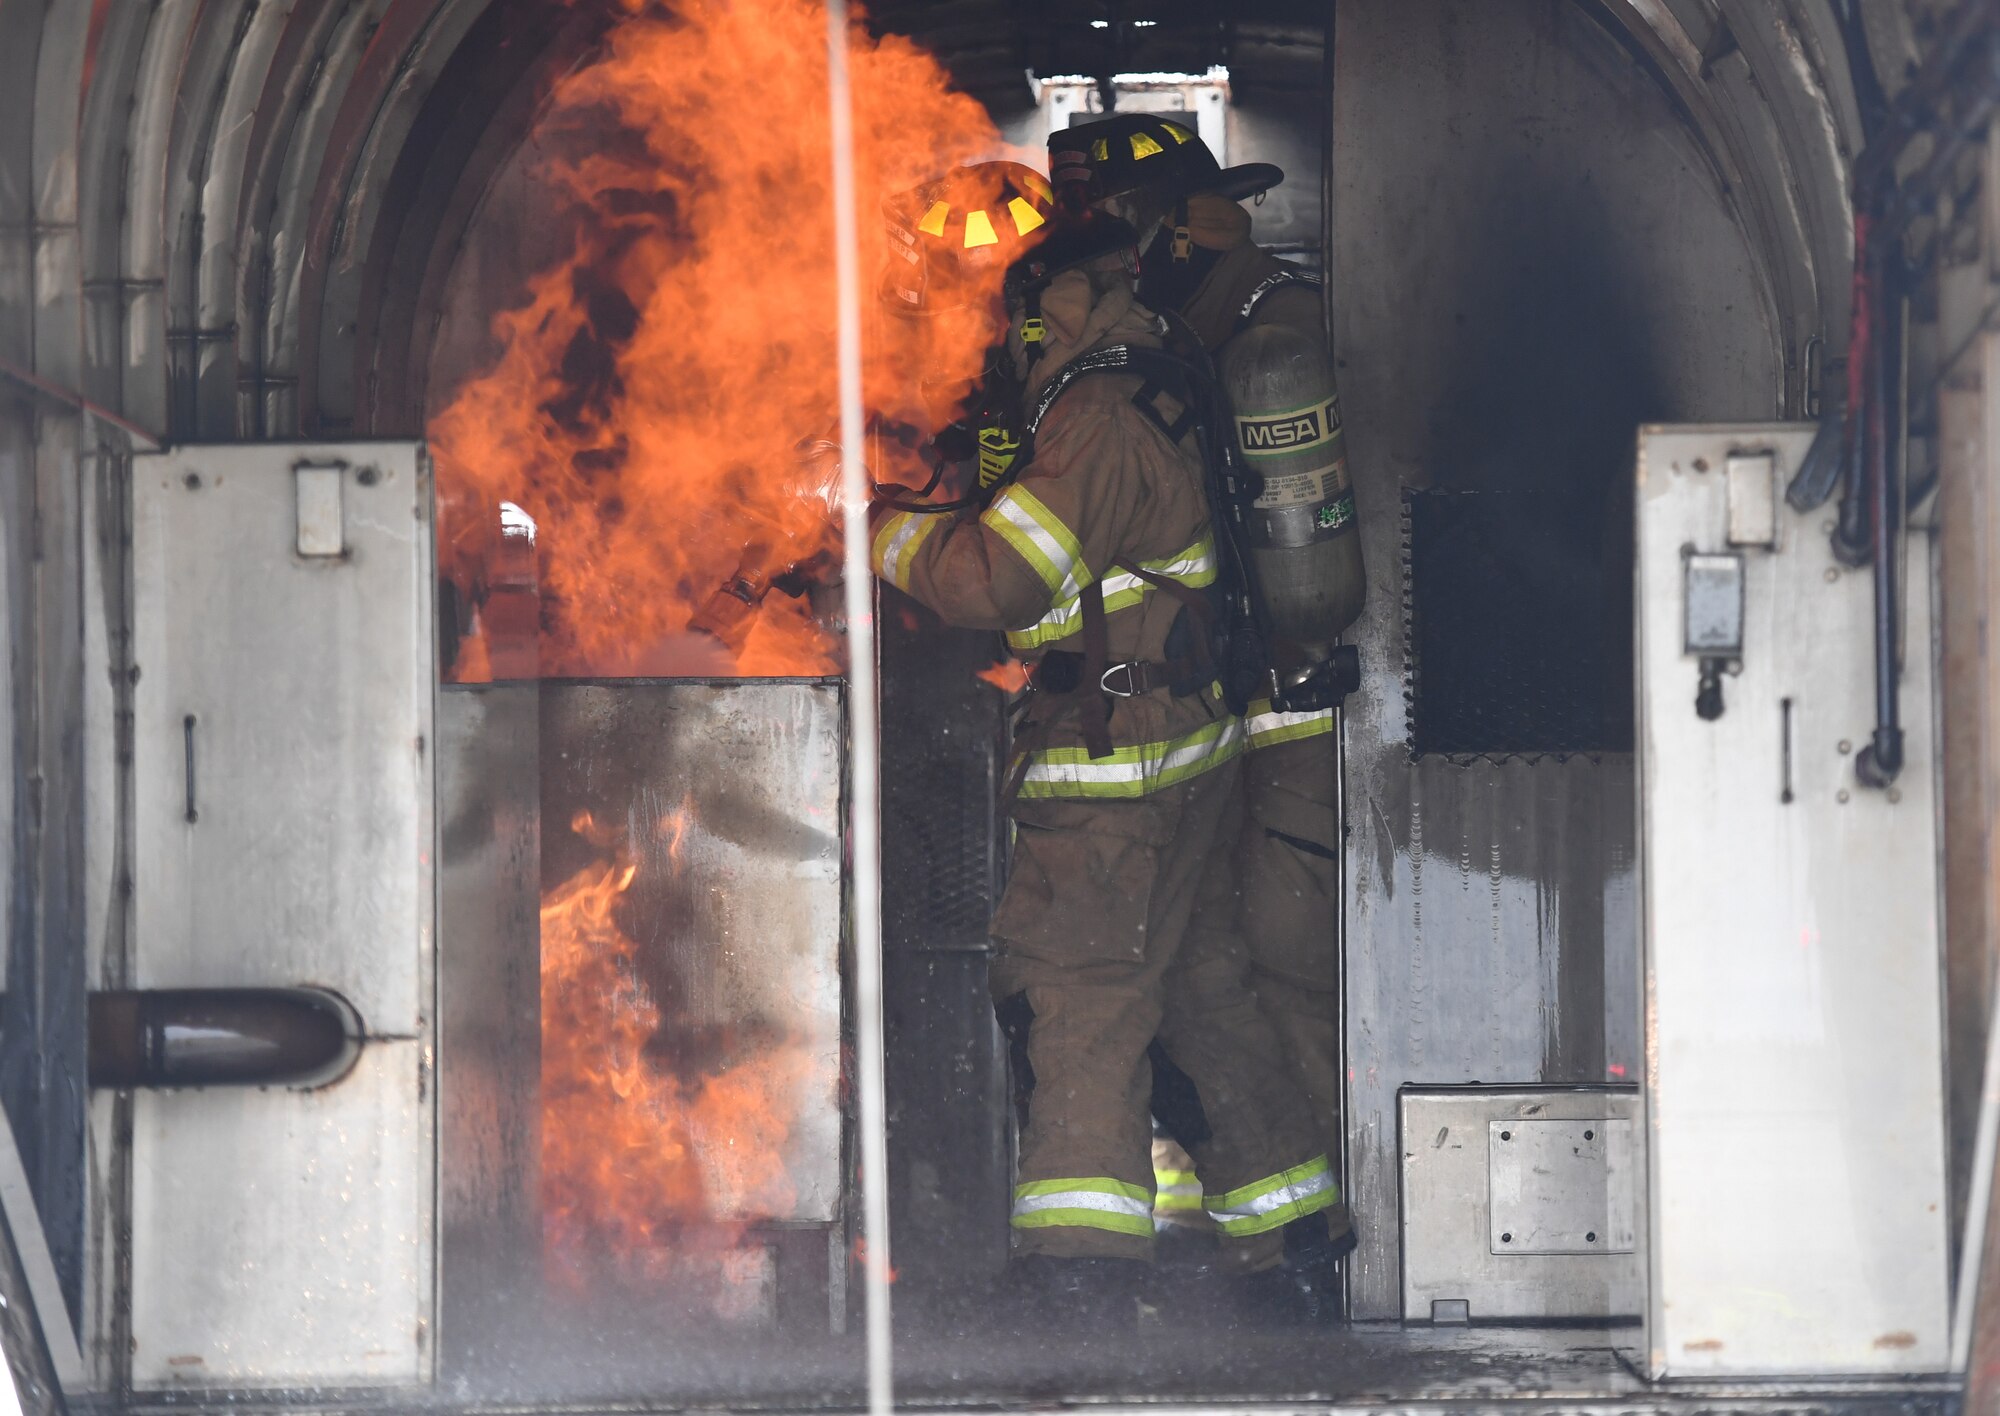 Cole Ballard and Seth Corn, 81st Infrastructure Division firefighters, use a hand-held hose to extinguish a fire inside a mock C-123 training device during an aircraft rescue fire fighting training exercise at Keesler Air Force Base, Mississippi, Nov. 8, 2019. The five-day joint agency training allowed the Keesler Fire Department and the Gulfport Combat Readiness Training Center Fire Department to meet the semi-annual training requirement to practice aircraft rescue and live fire training evolutions. (U.S. Air Force photo by Kemberly Groue)